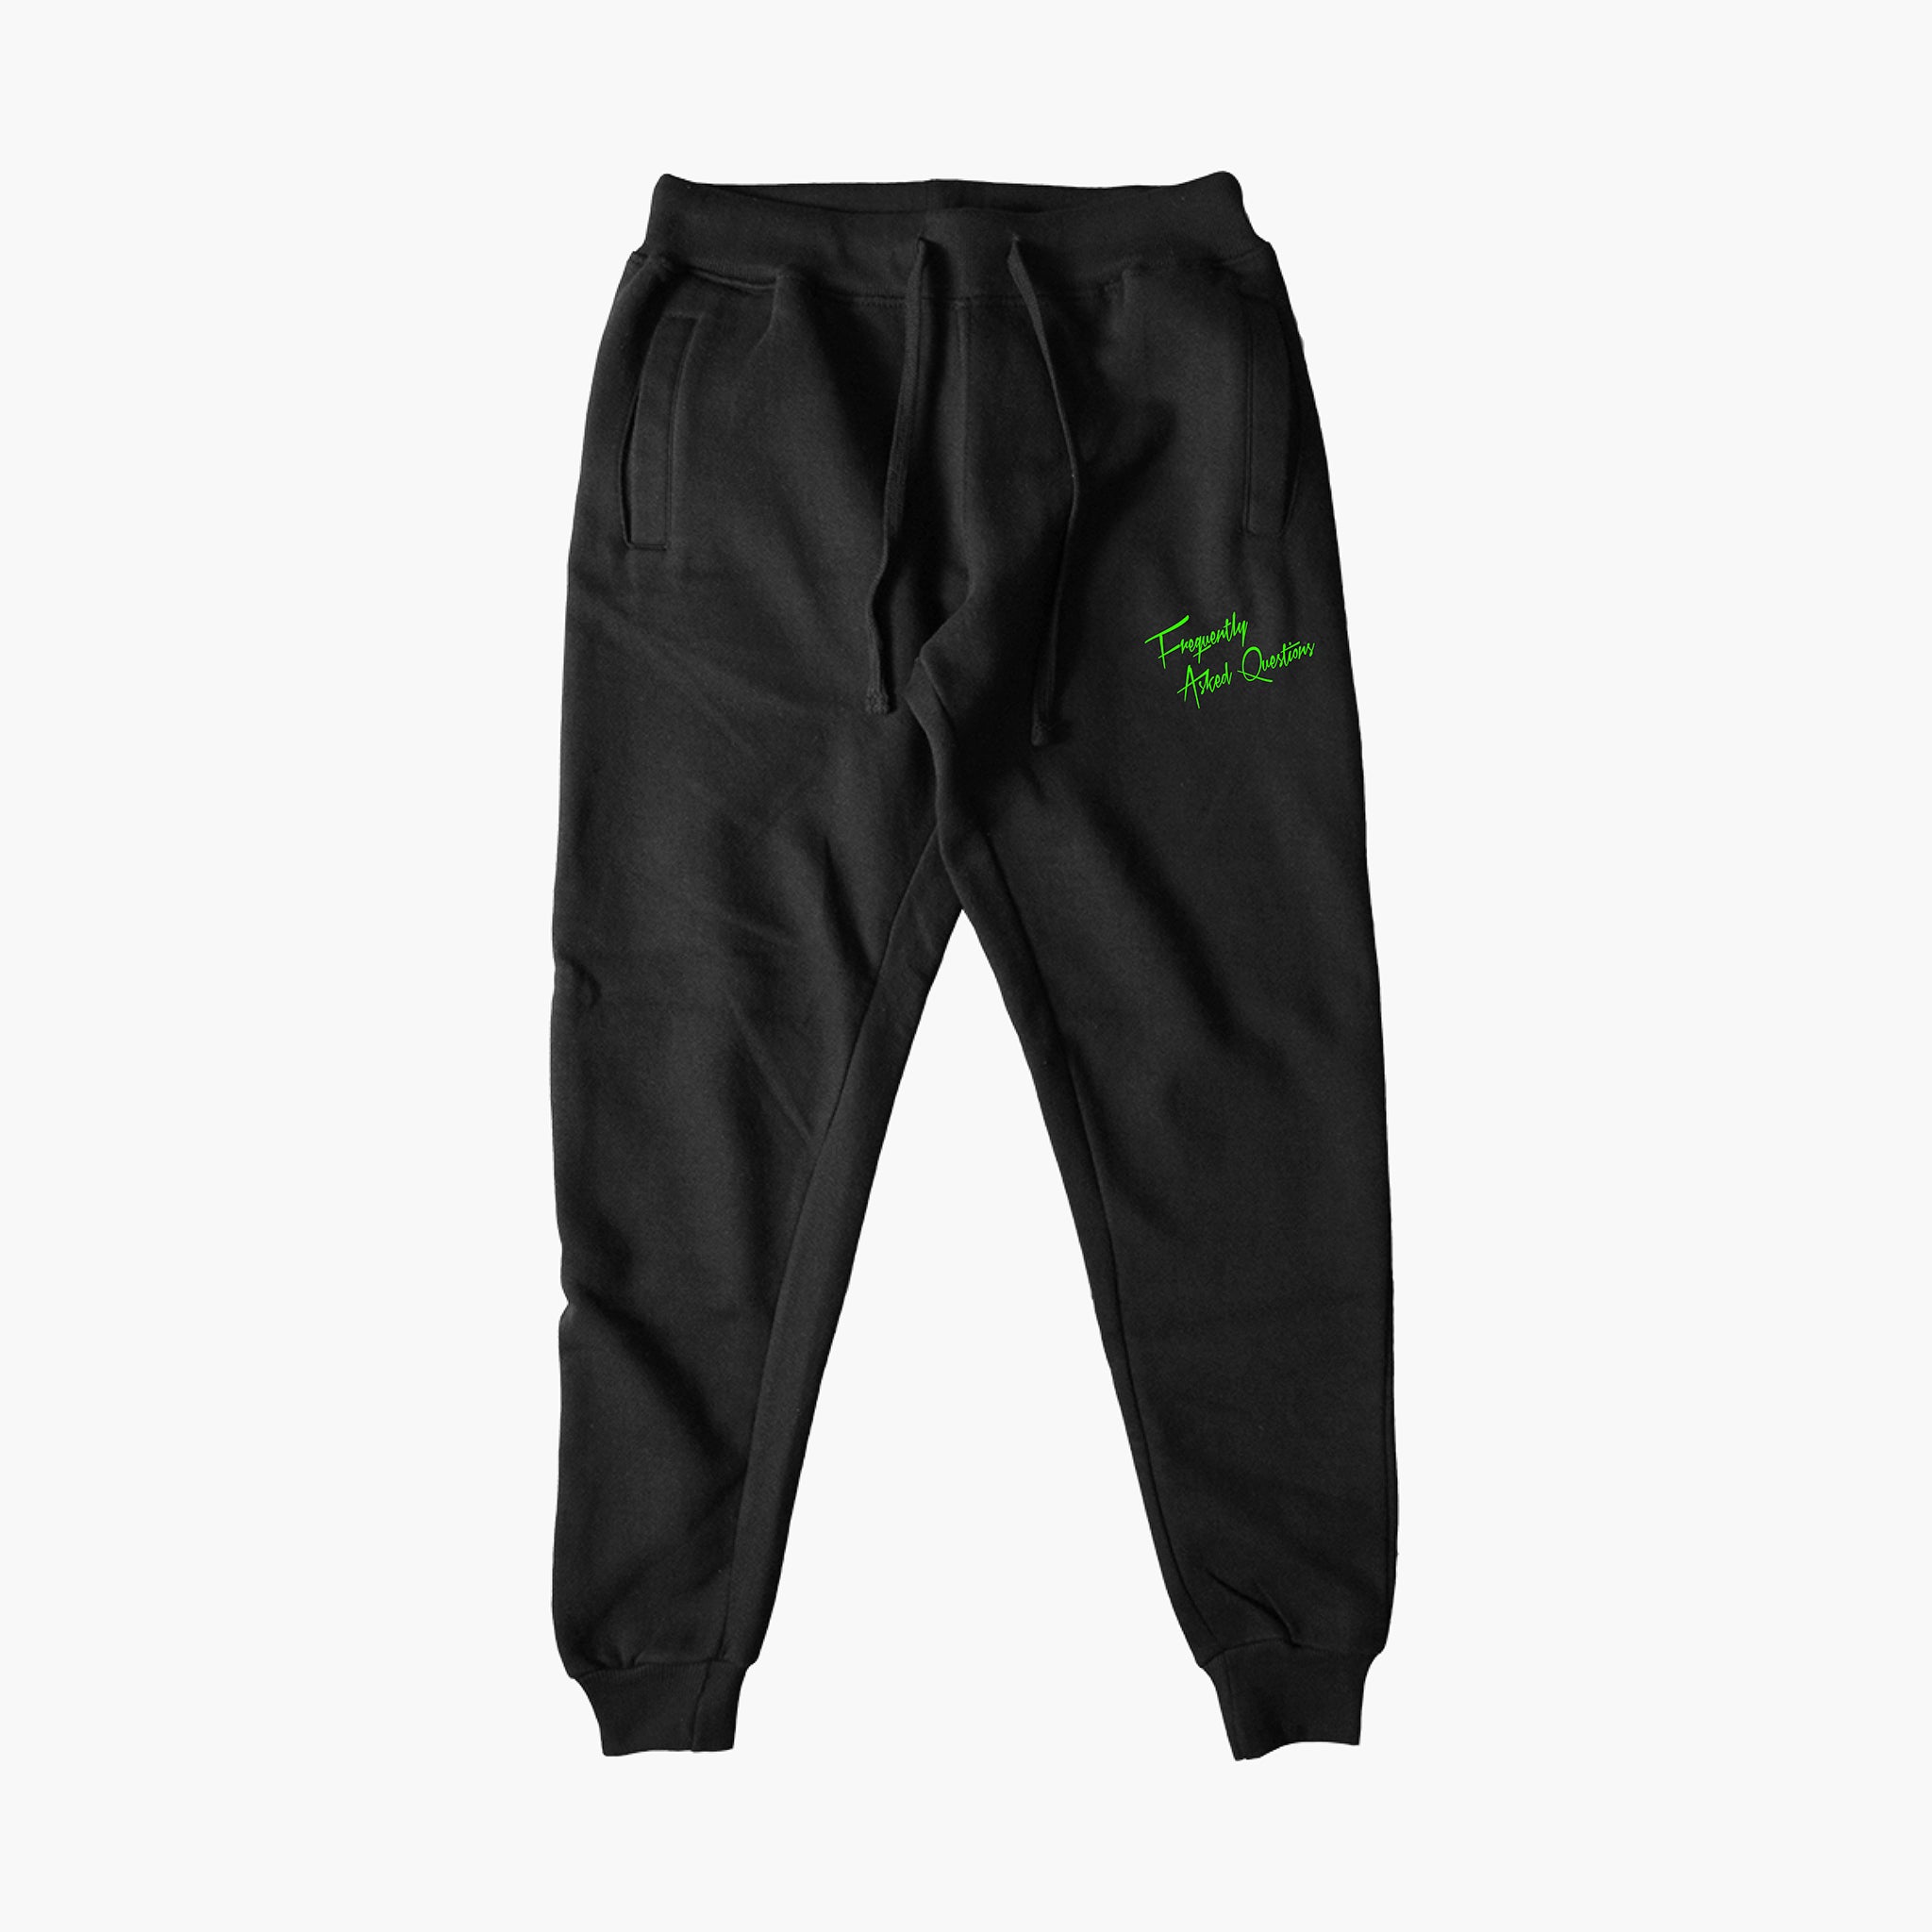 Odyssey Joggers - Frequently Asked Questions